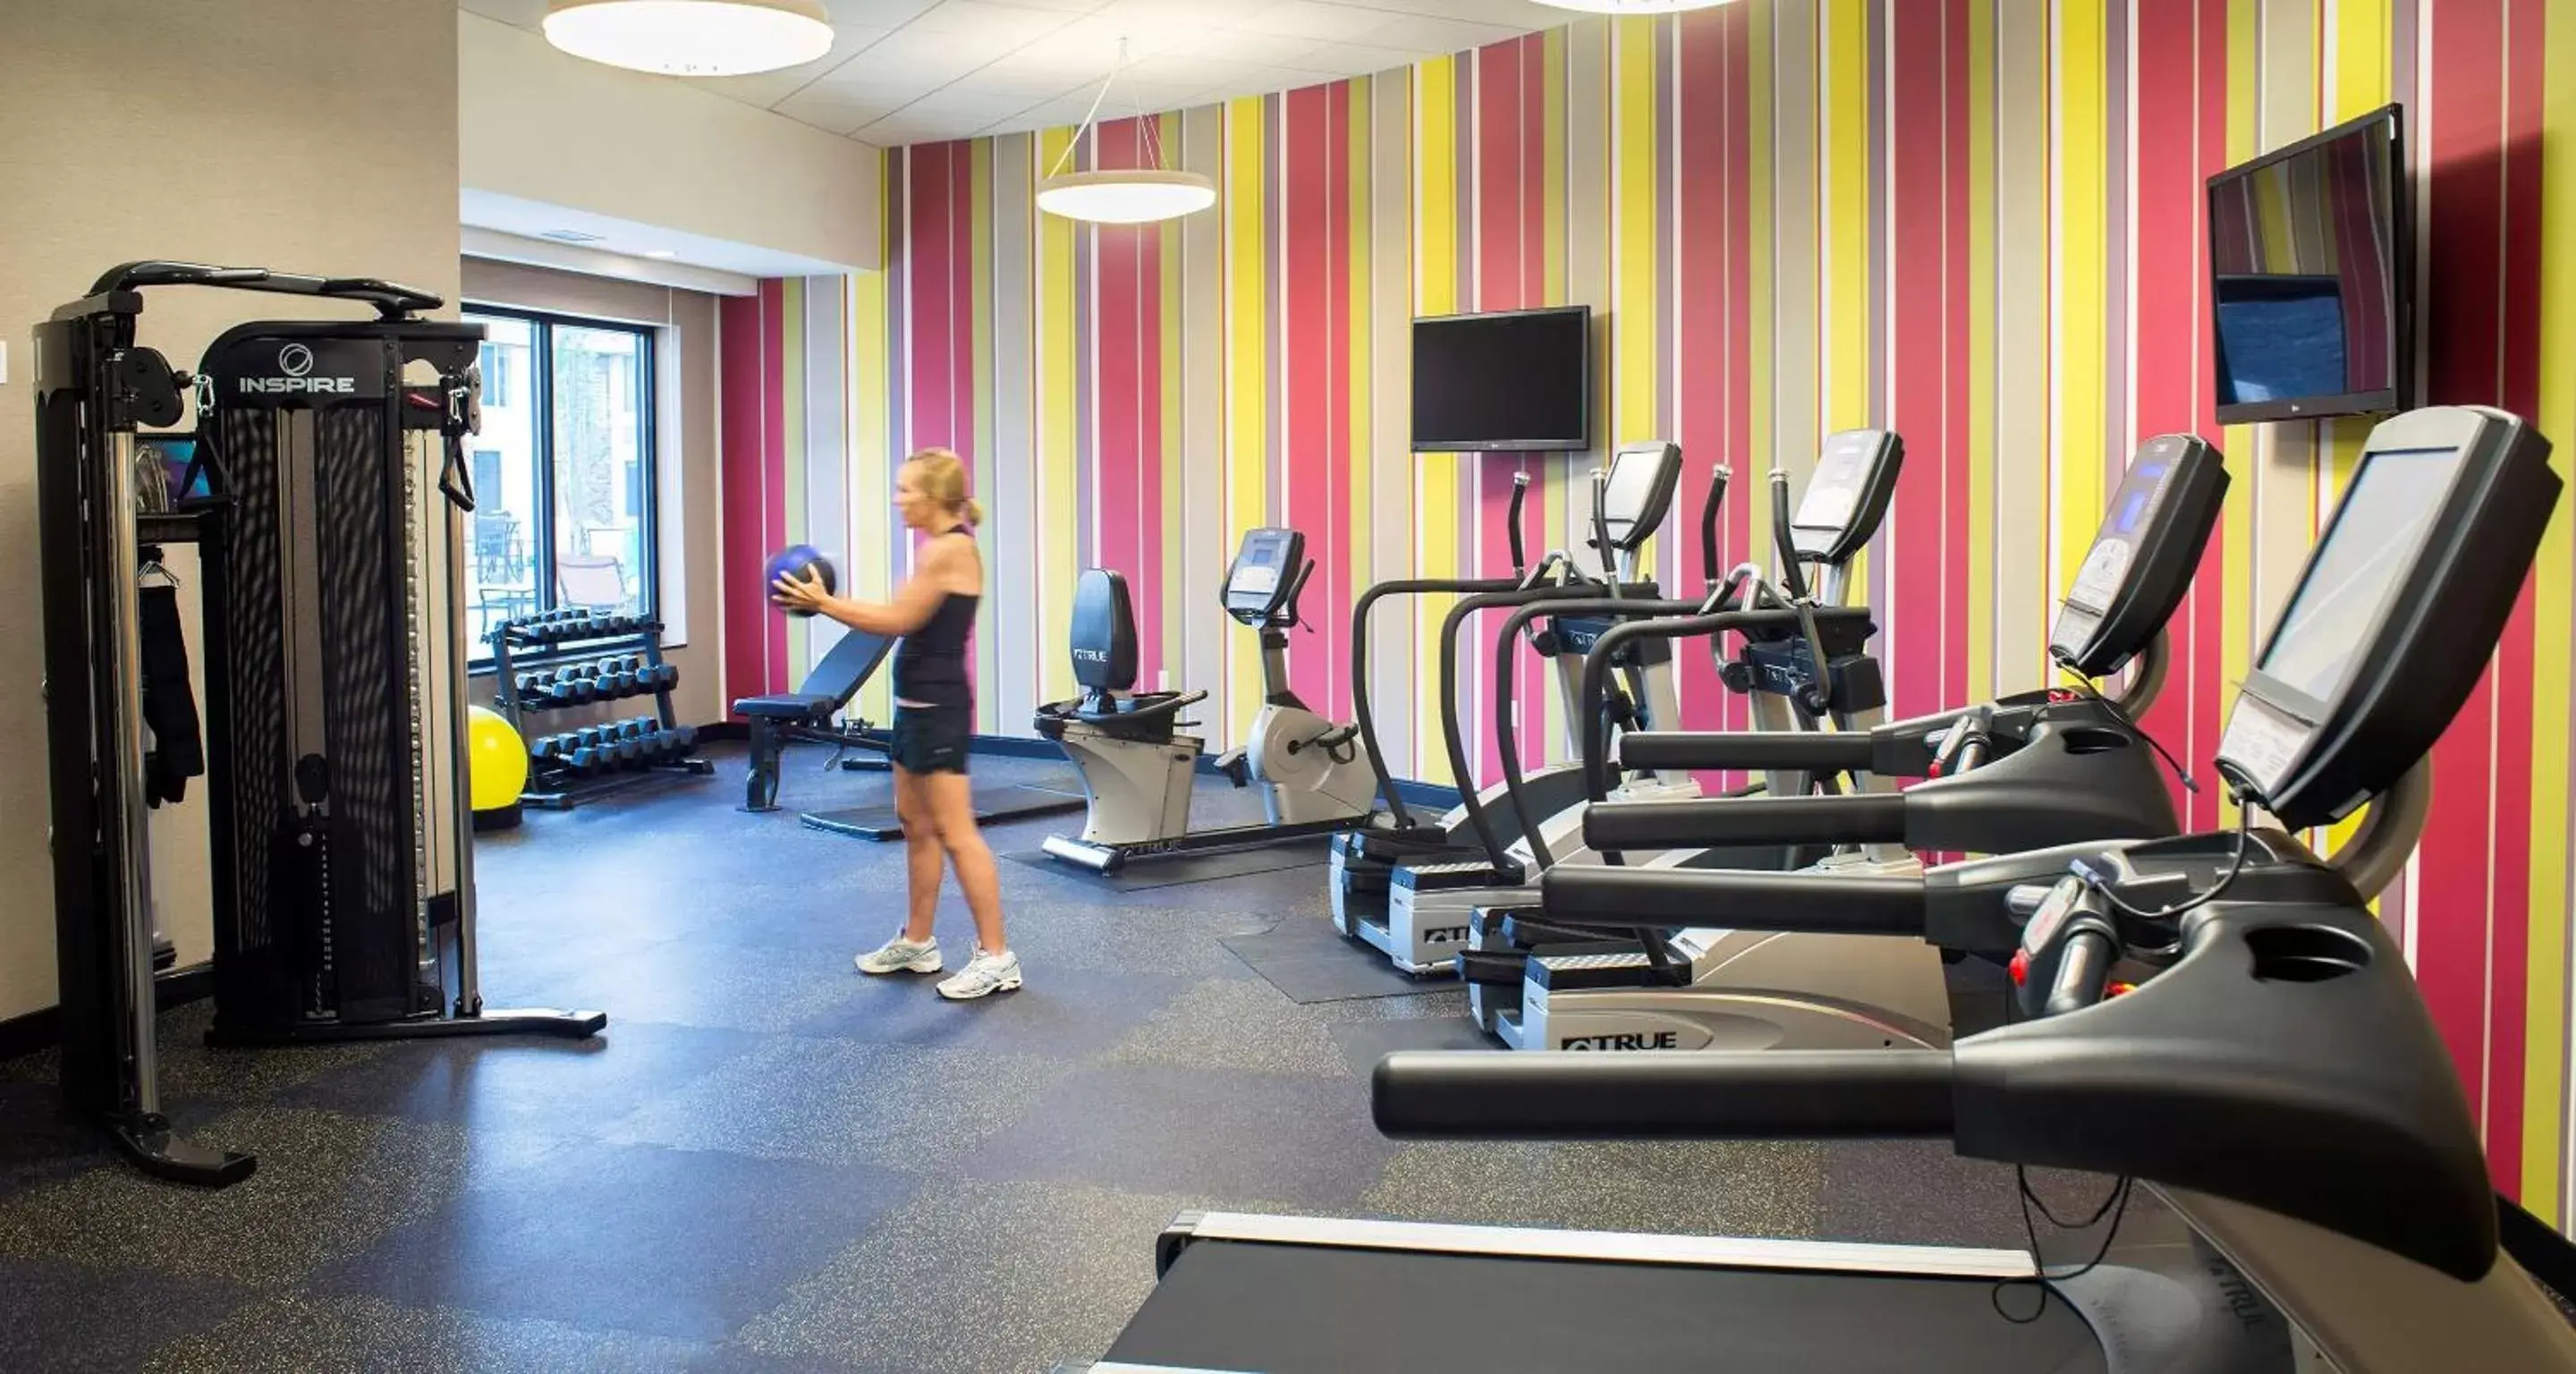 Fitness centre/facilities, Fitness Center/Facilities in Hotel Marshfield, BW Premier Collection